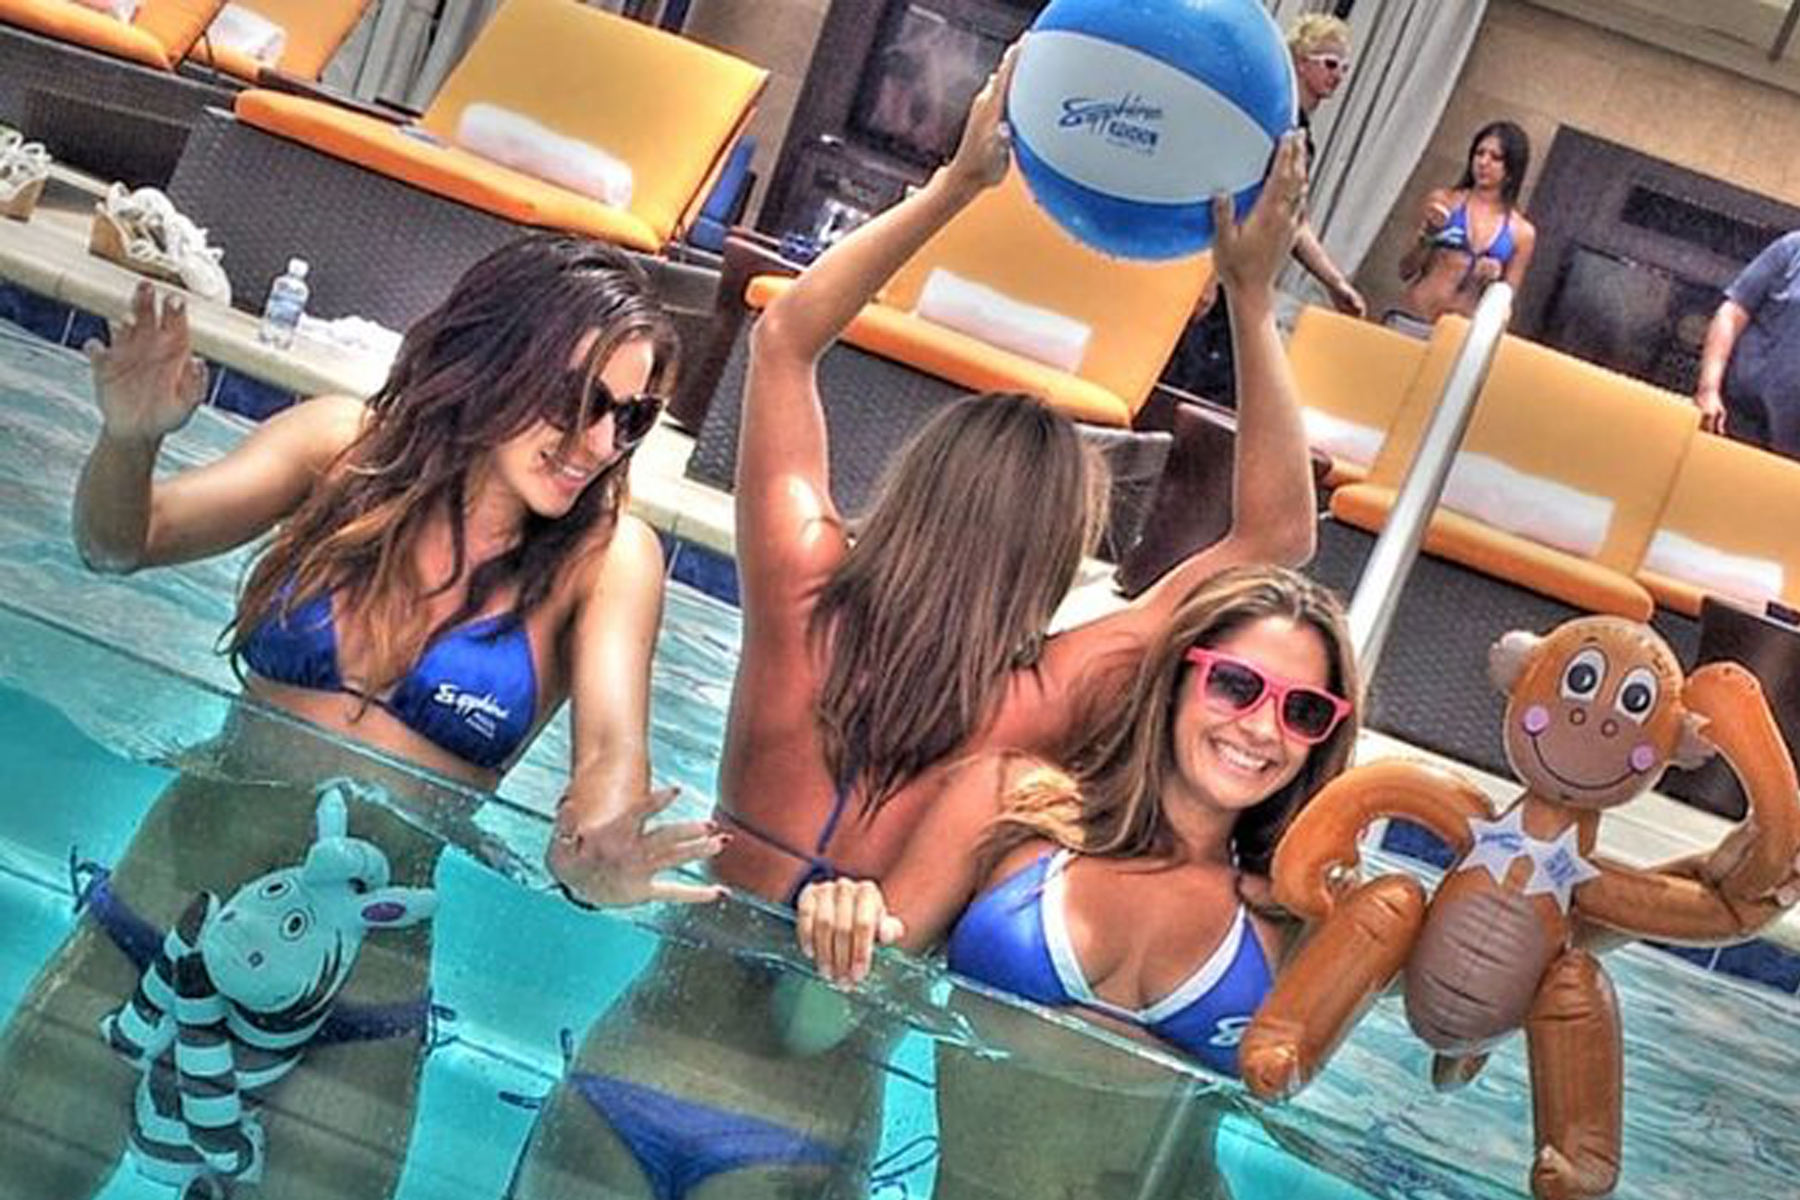 Sapphires Pool Party and Dayclub in Las Vegas